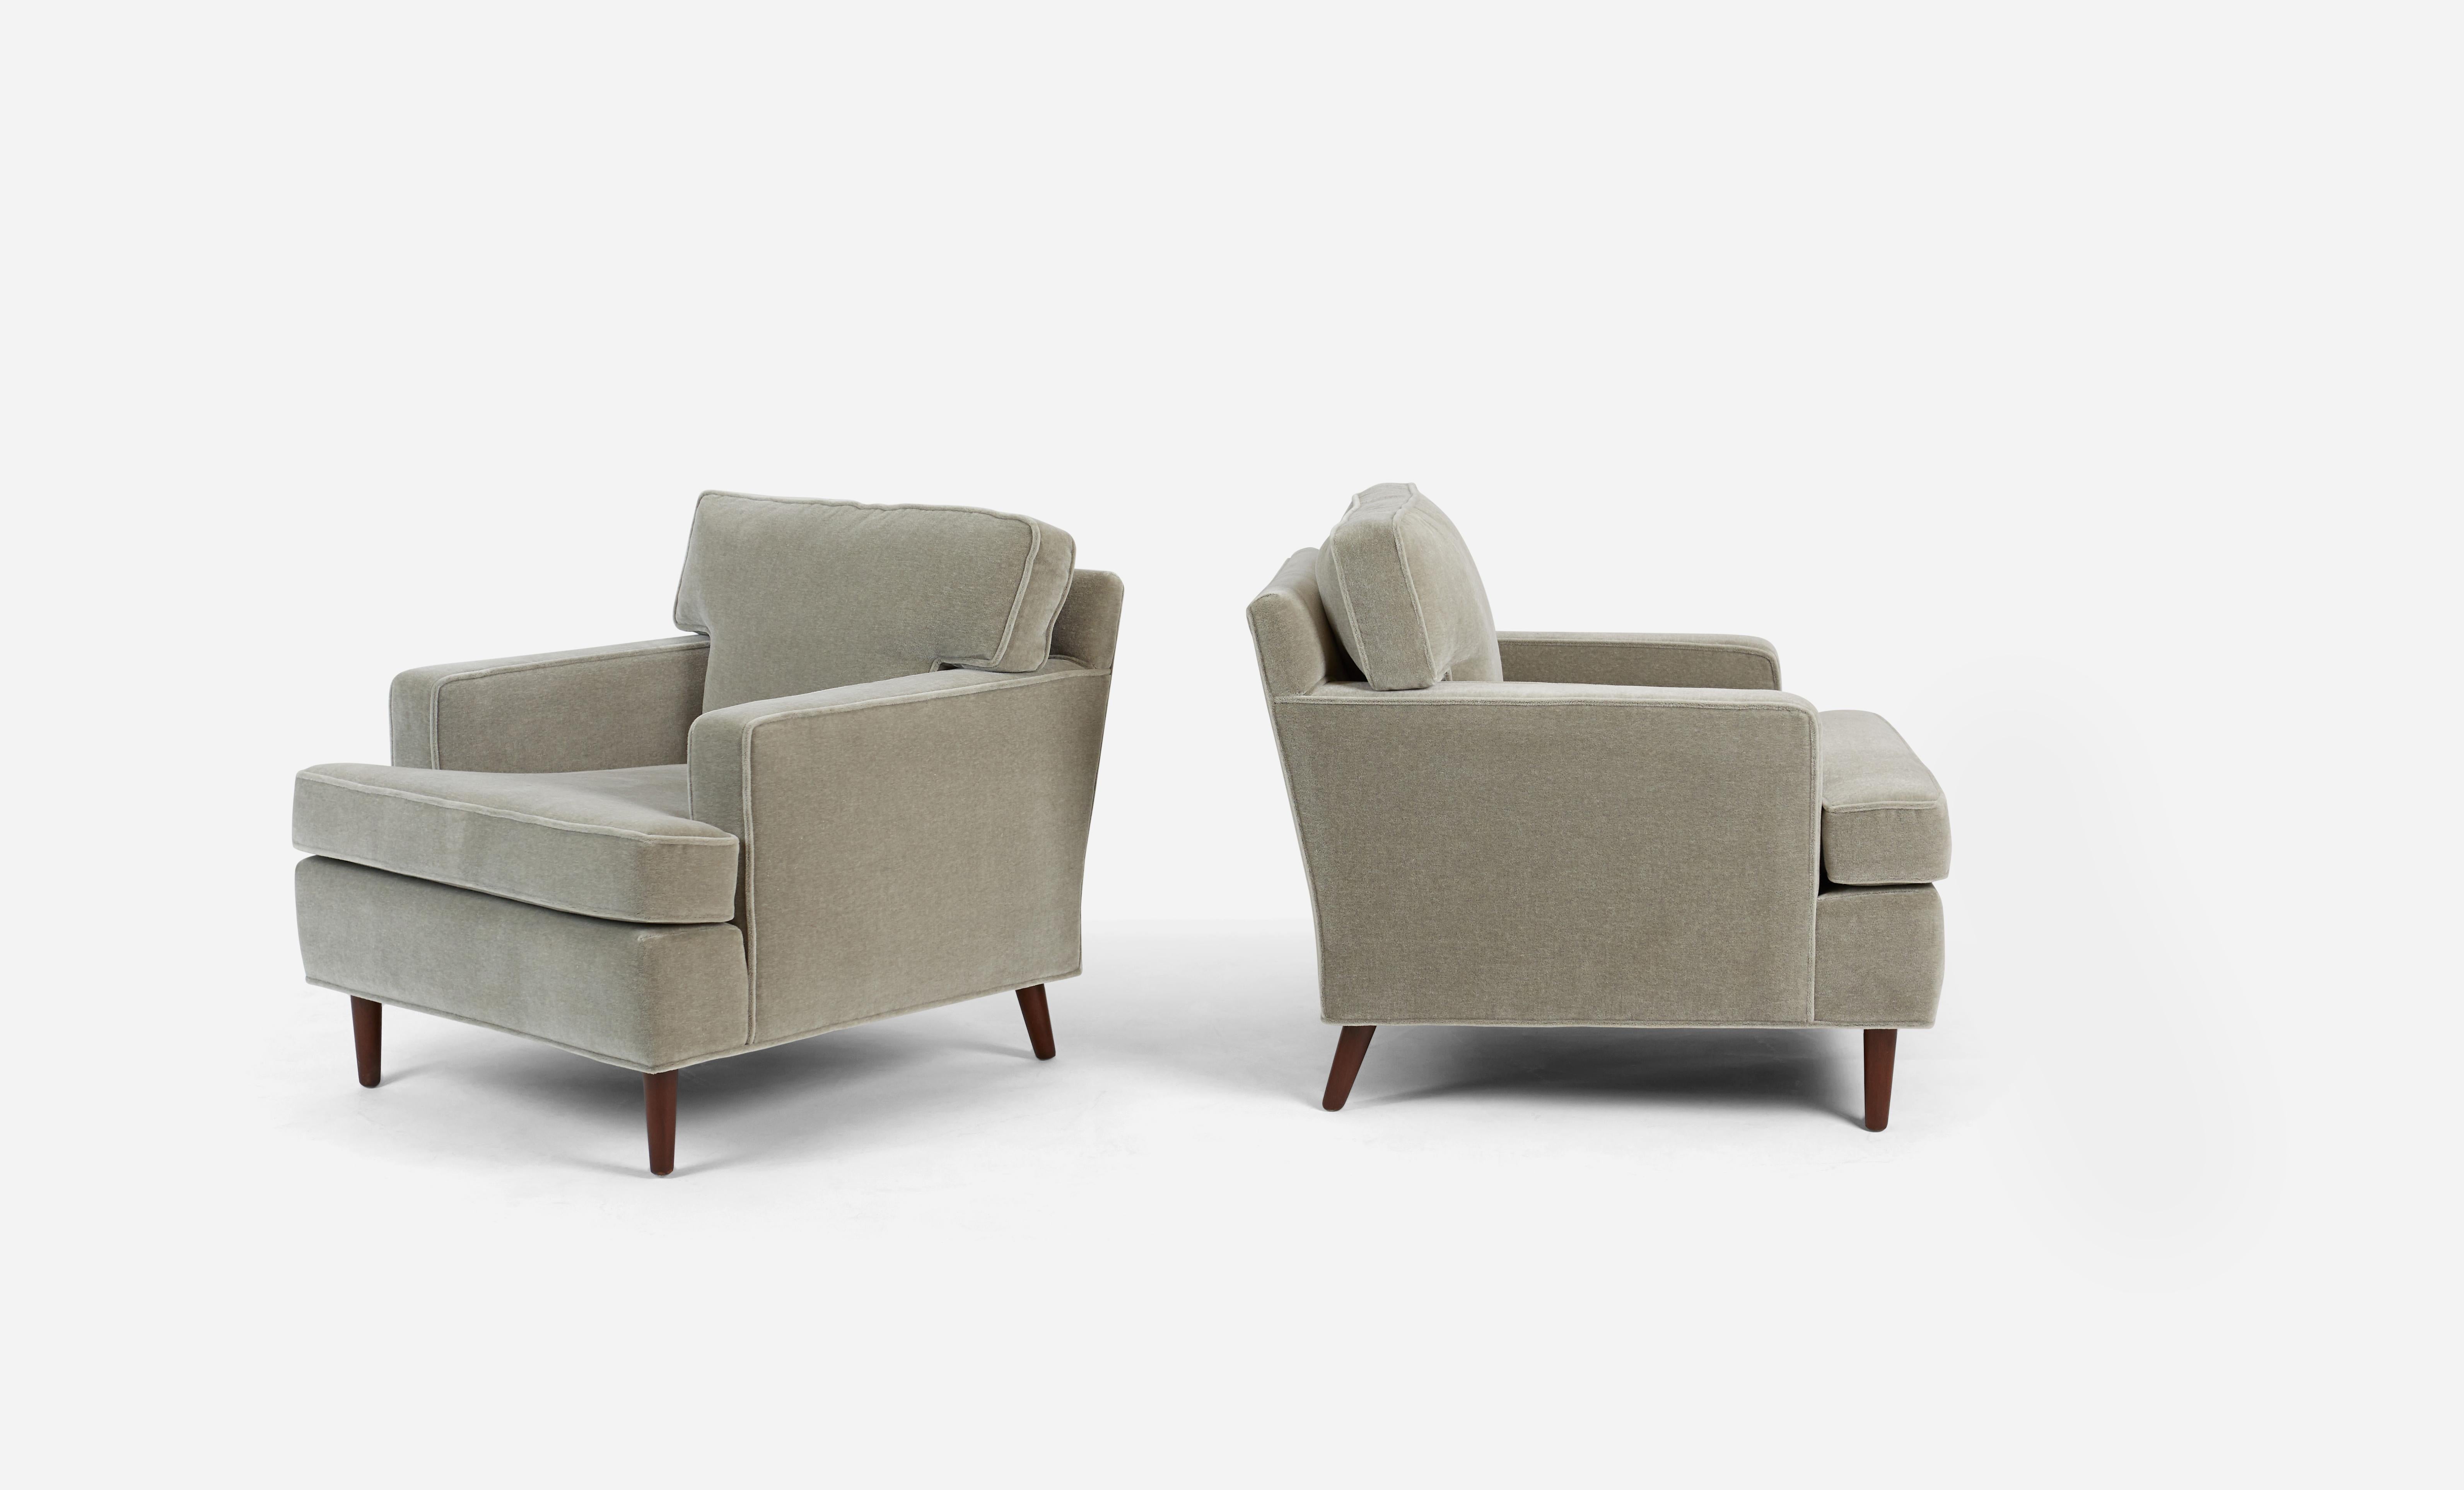 Pair of lounge chairs by Edward Wormley for Dunbar. Fully restored. Legs have been refinished in an espresso tone. New light grey mohair with new feathers and foam cushions. Dunbar model 4872a. Beautiful and Classic Dunbar form.